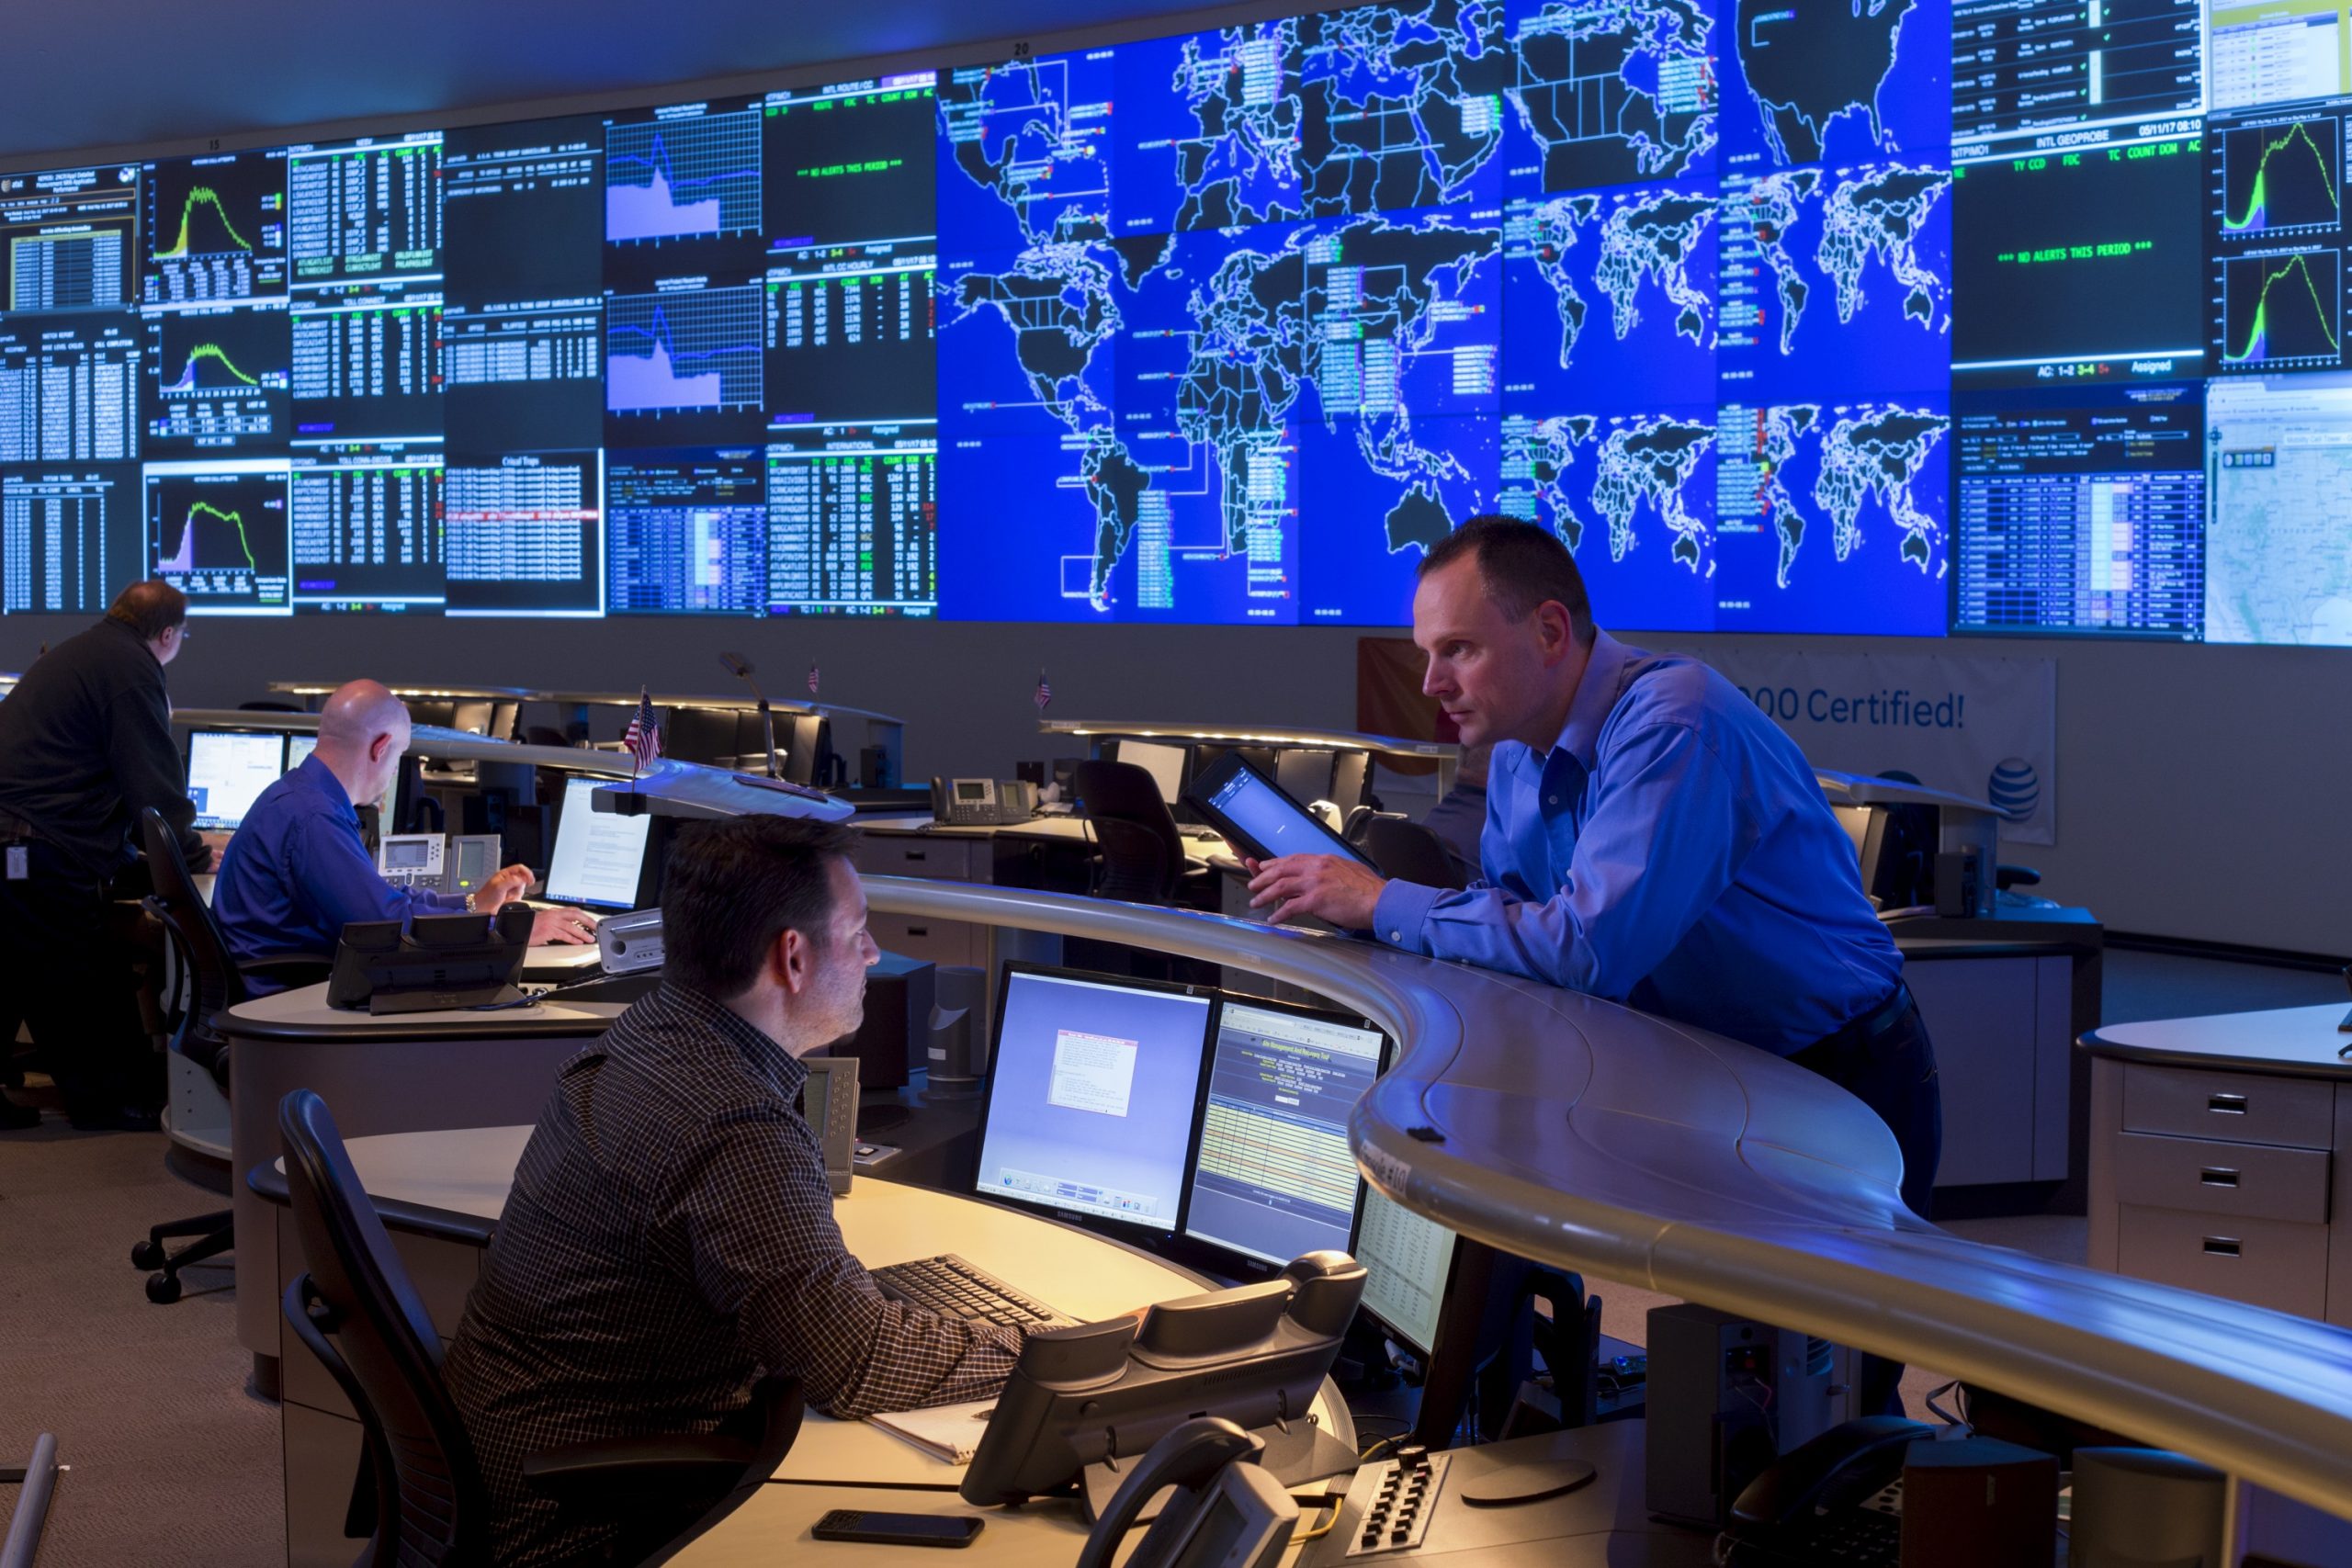 The AT&T Operations Center